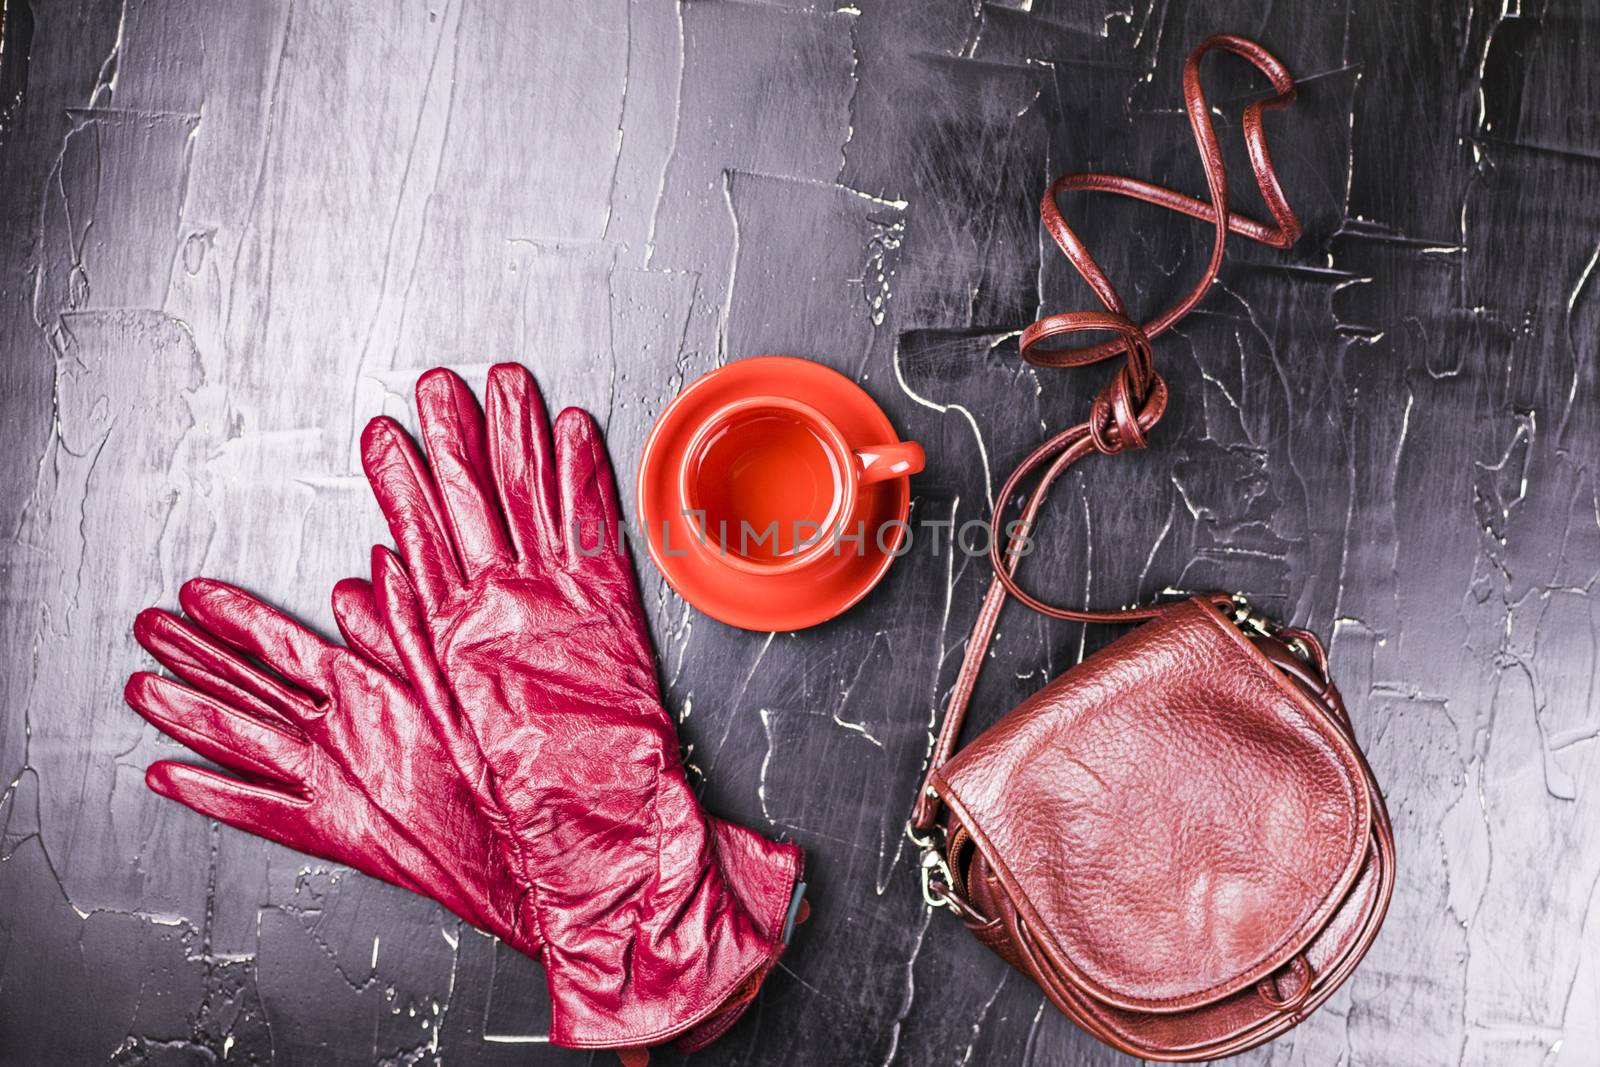 Gloves and bag